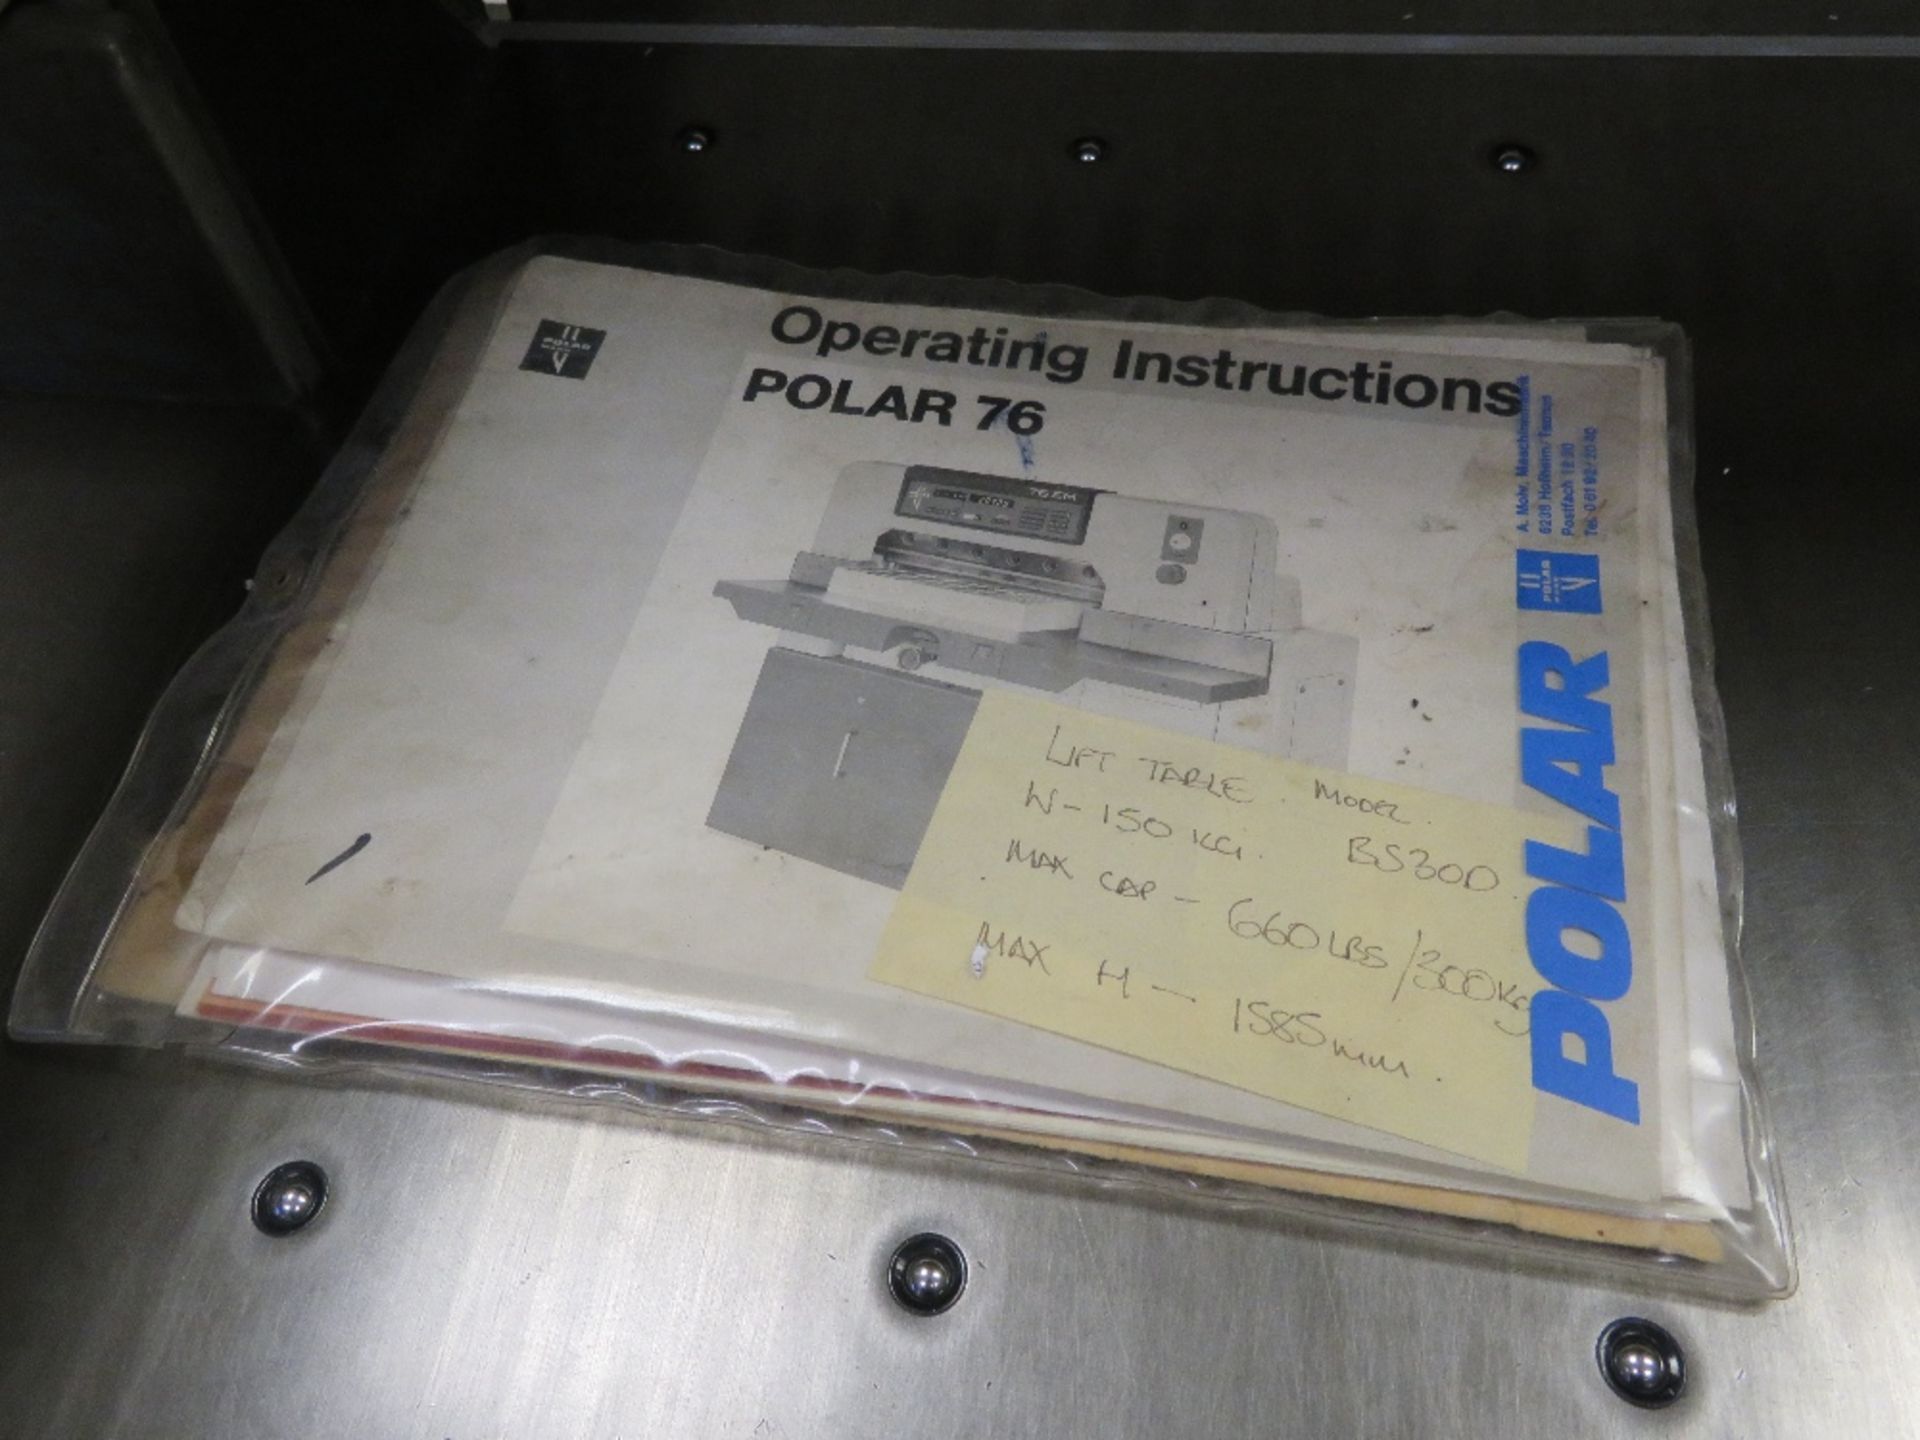 Polar Mohr 76 EM Paper Guillotine, Serial Number 5661976 with Light Guards and 4x Spare Blades - Image 8 of 8